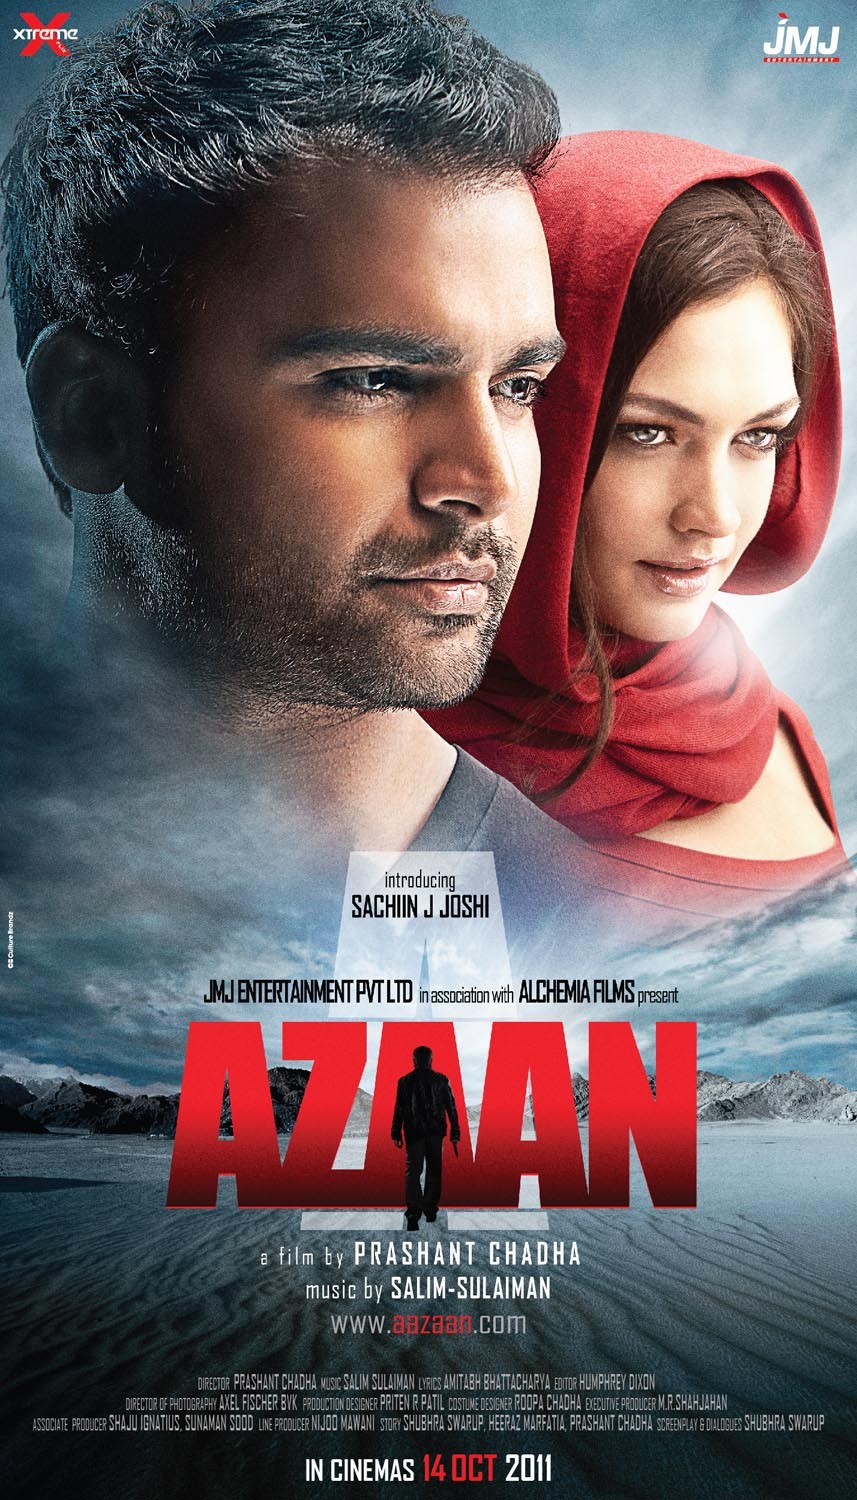 Extra Large Movie Poster Image for Aazaan (#3 of 3)